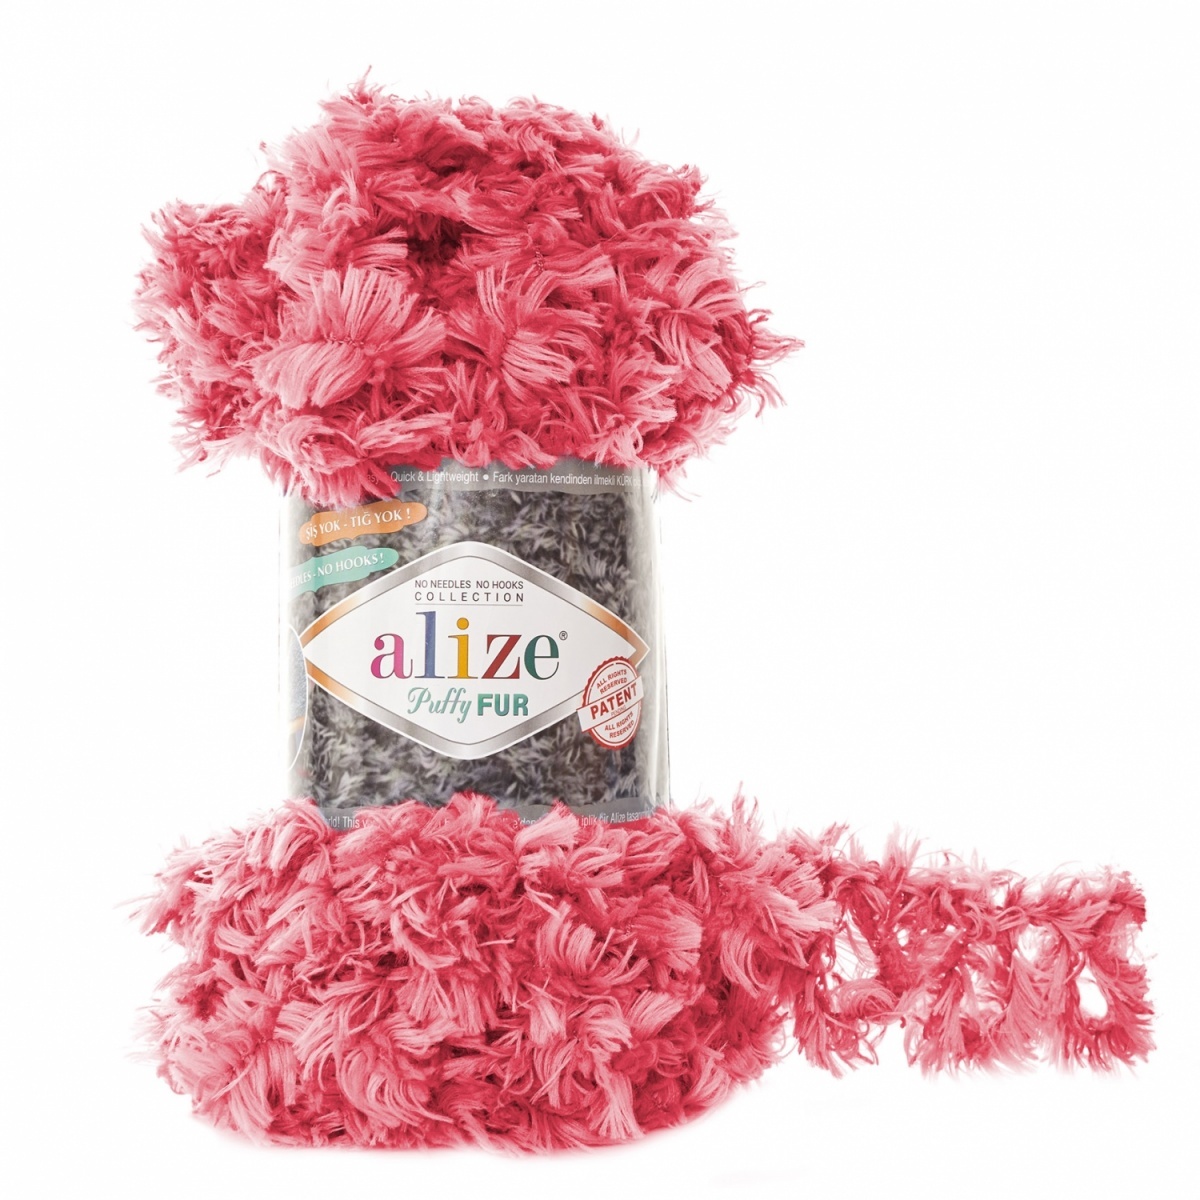 Alize Puffy Fur, 100% Polyester 5 Skein Value Pack, 500g фото 12